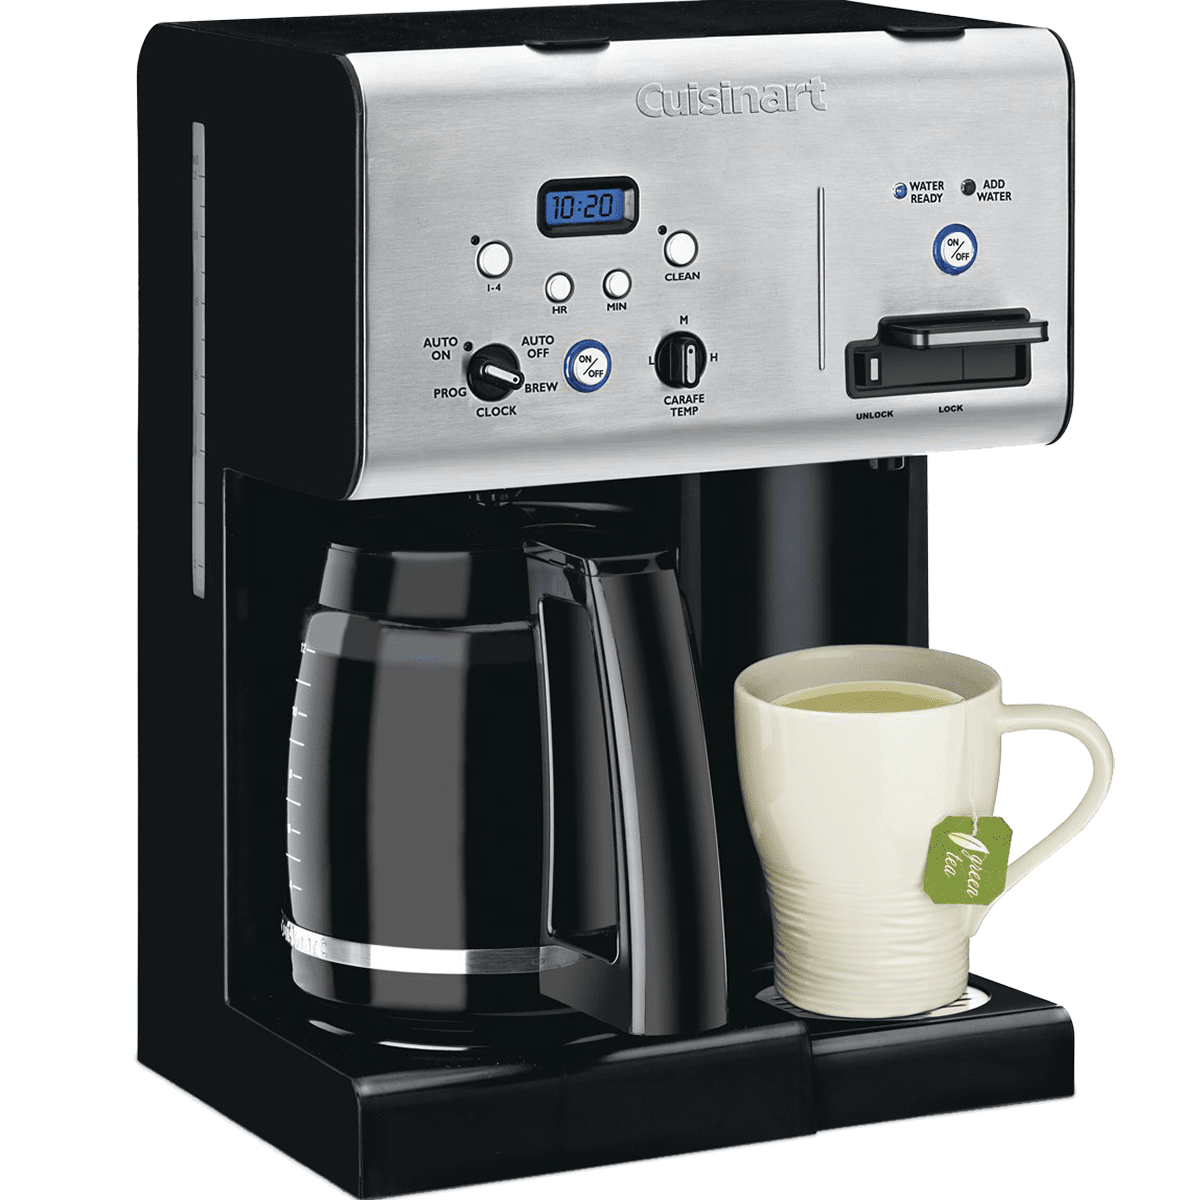 Cuisinart Coffee Plus 12 Cup Programmable Coffee Maker Plus Hot Water System (CHW12)